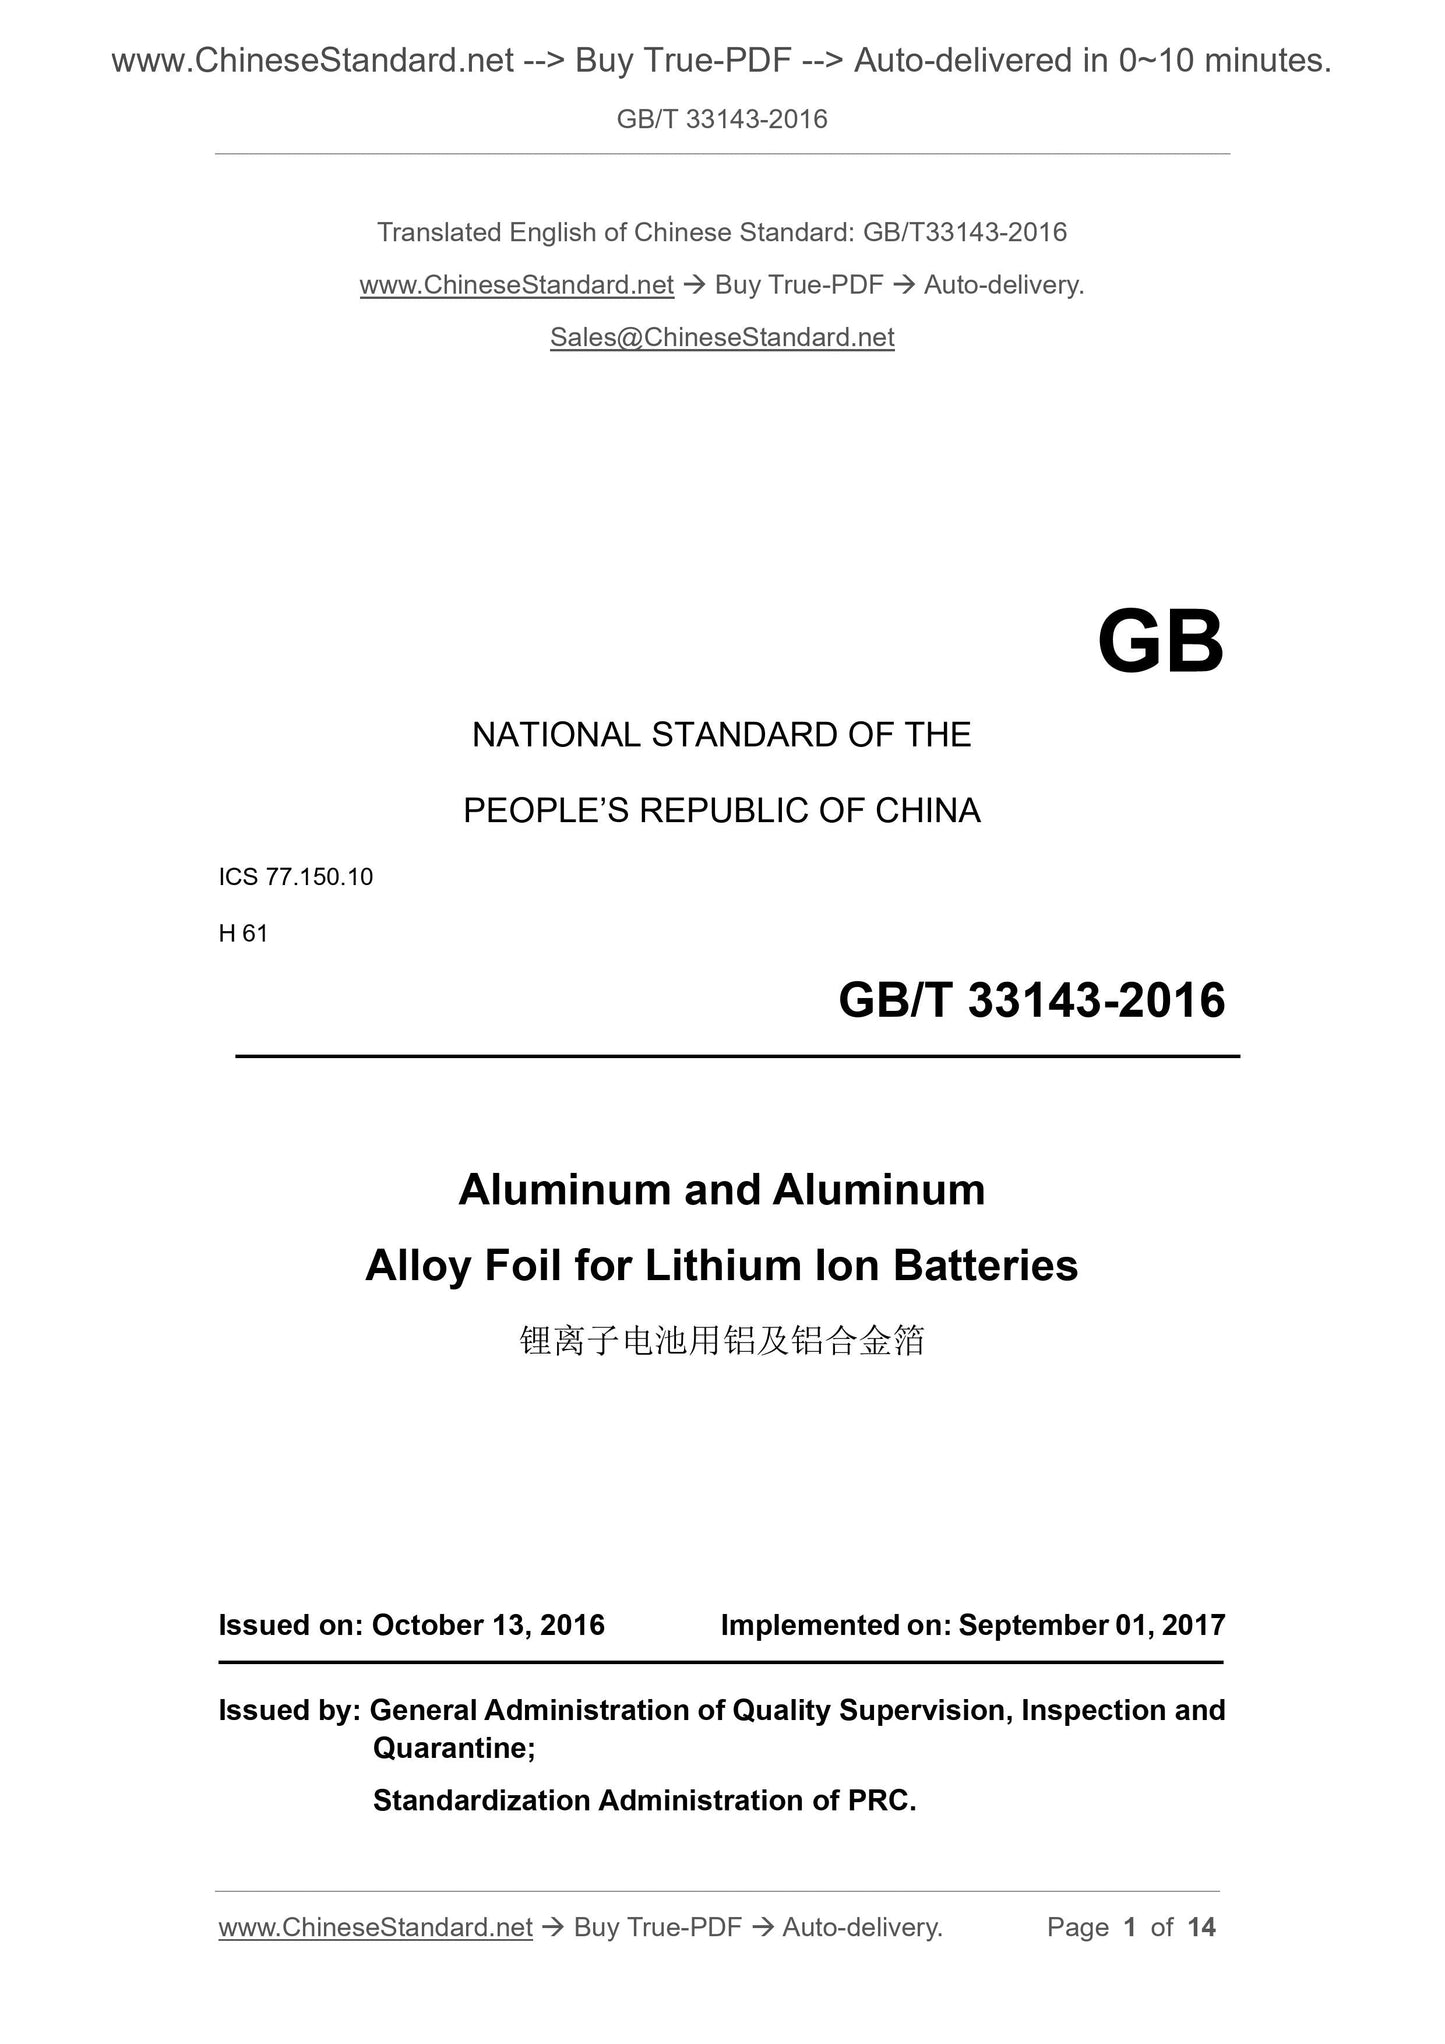 GB/T 33143-2016 Page 1